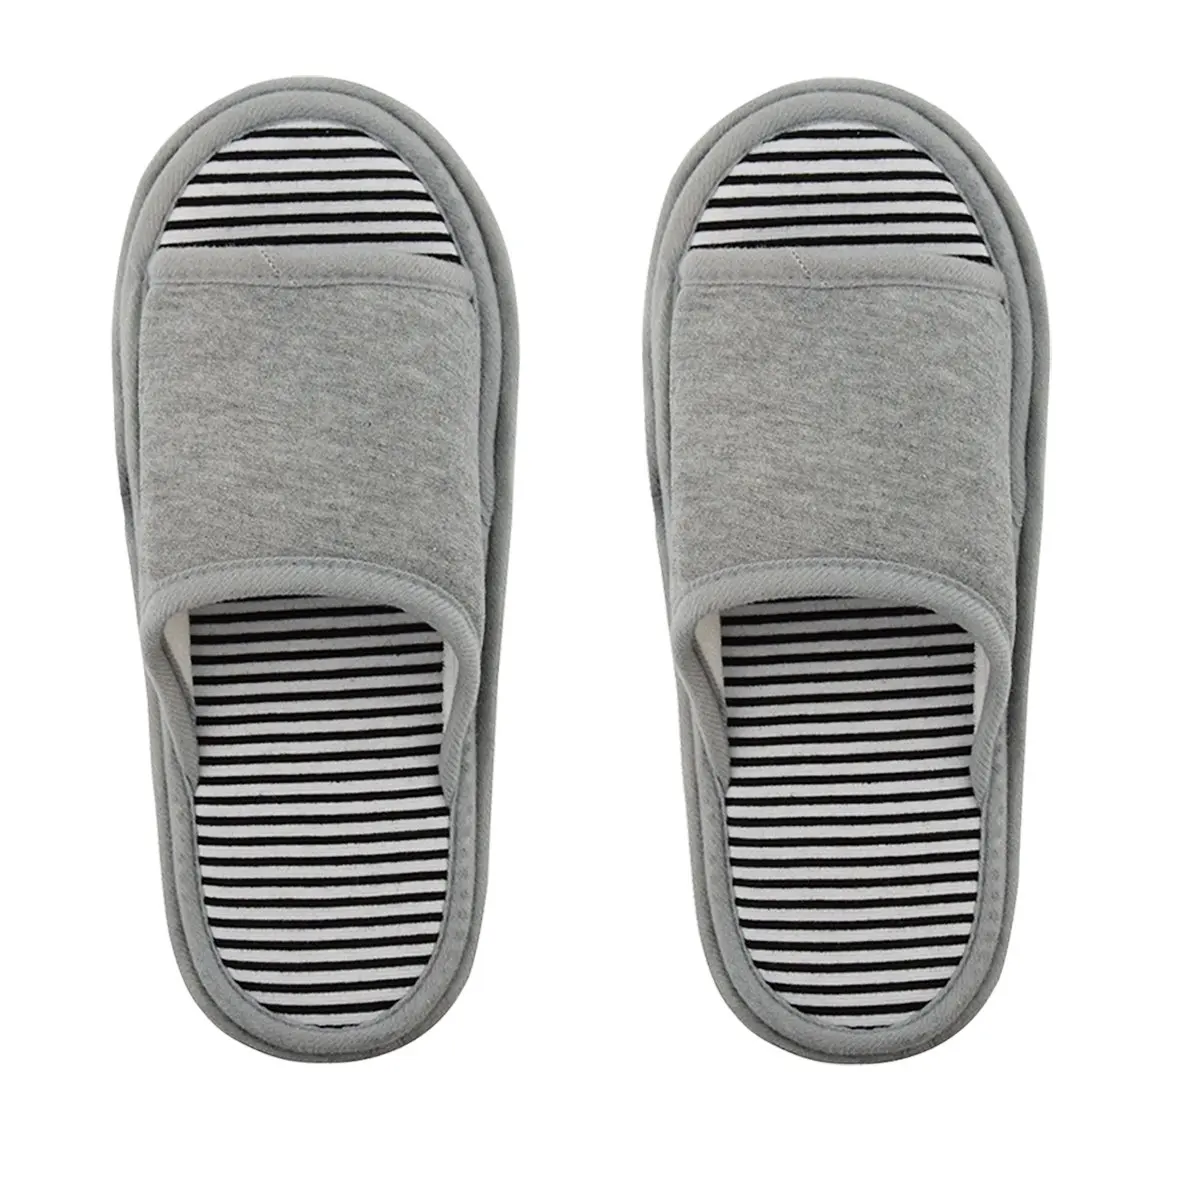 Cheap Floor Cleaning Slippers Men, find 